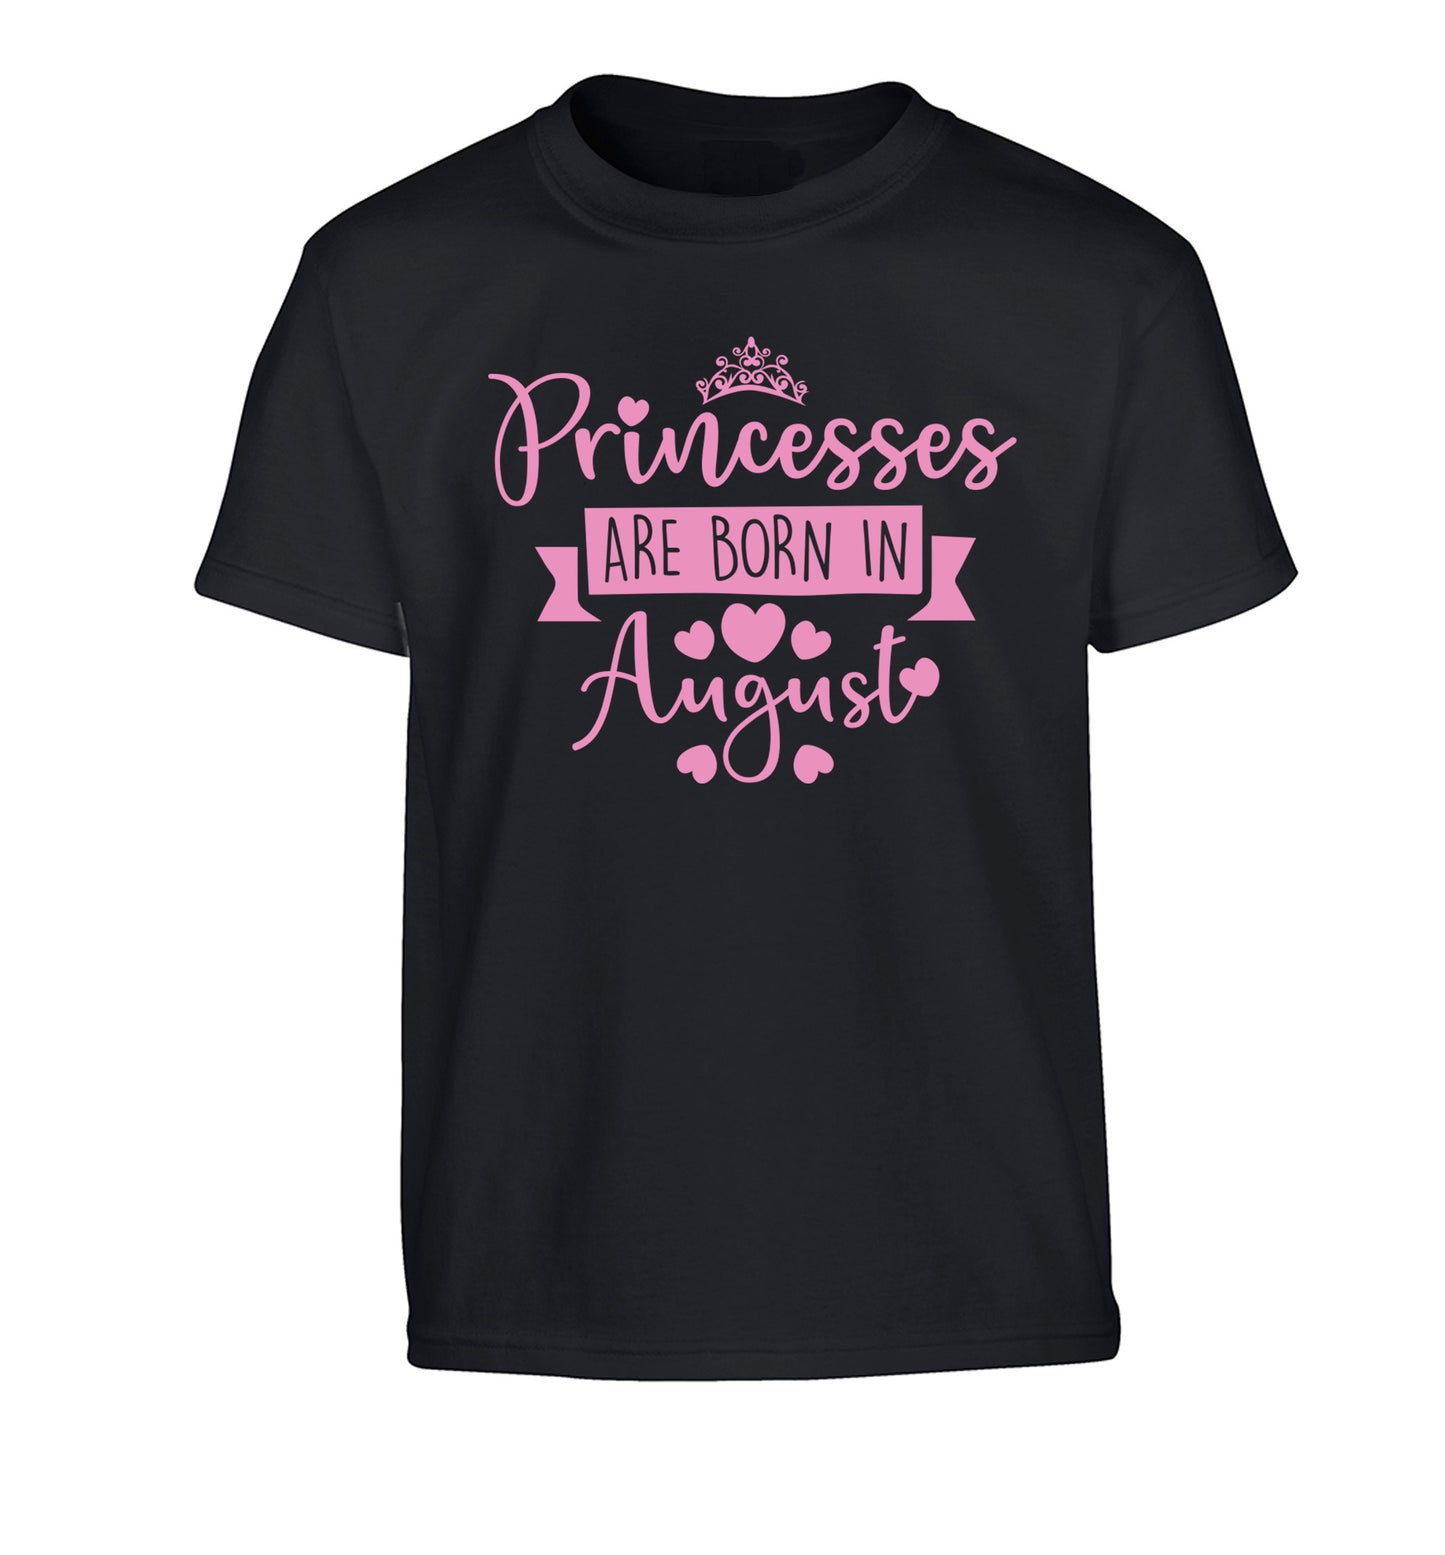 Princesses are born in August Children's black Tshirt 12-13 Years